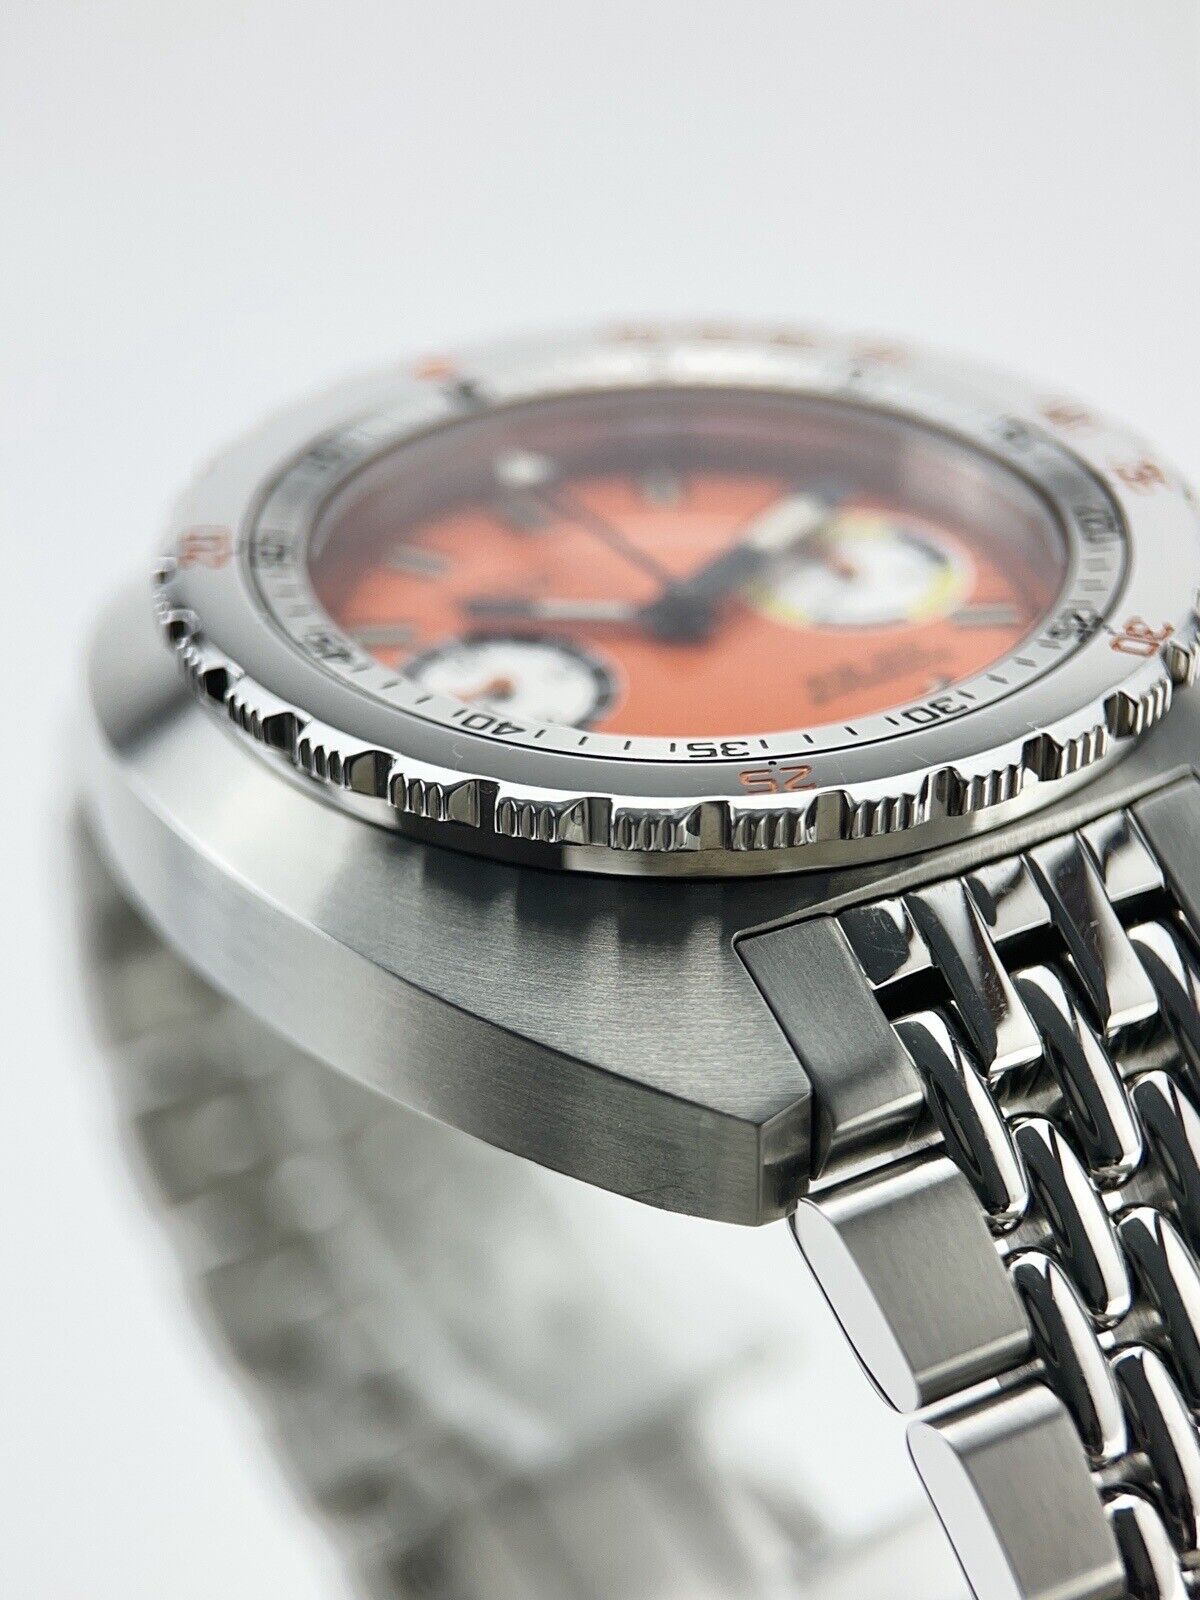 Doxa Sub 43mm Automatic Orange Dial Limited Edition Sub 200 T-Graph Box & Papers